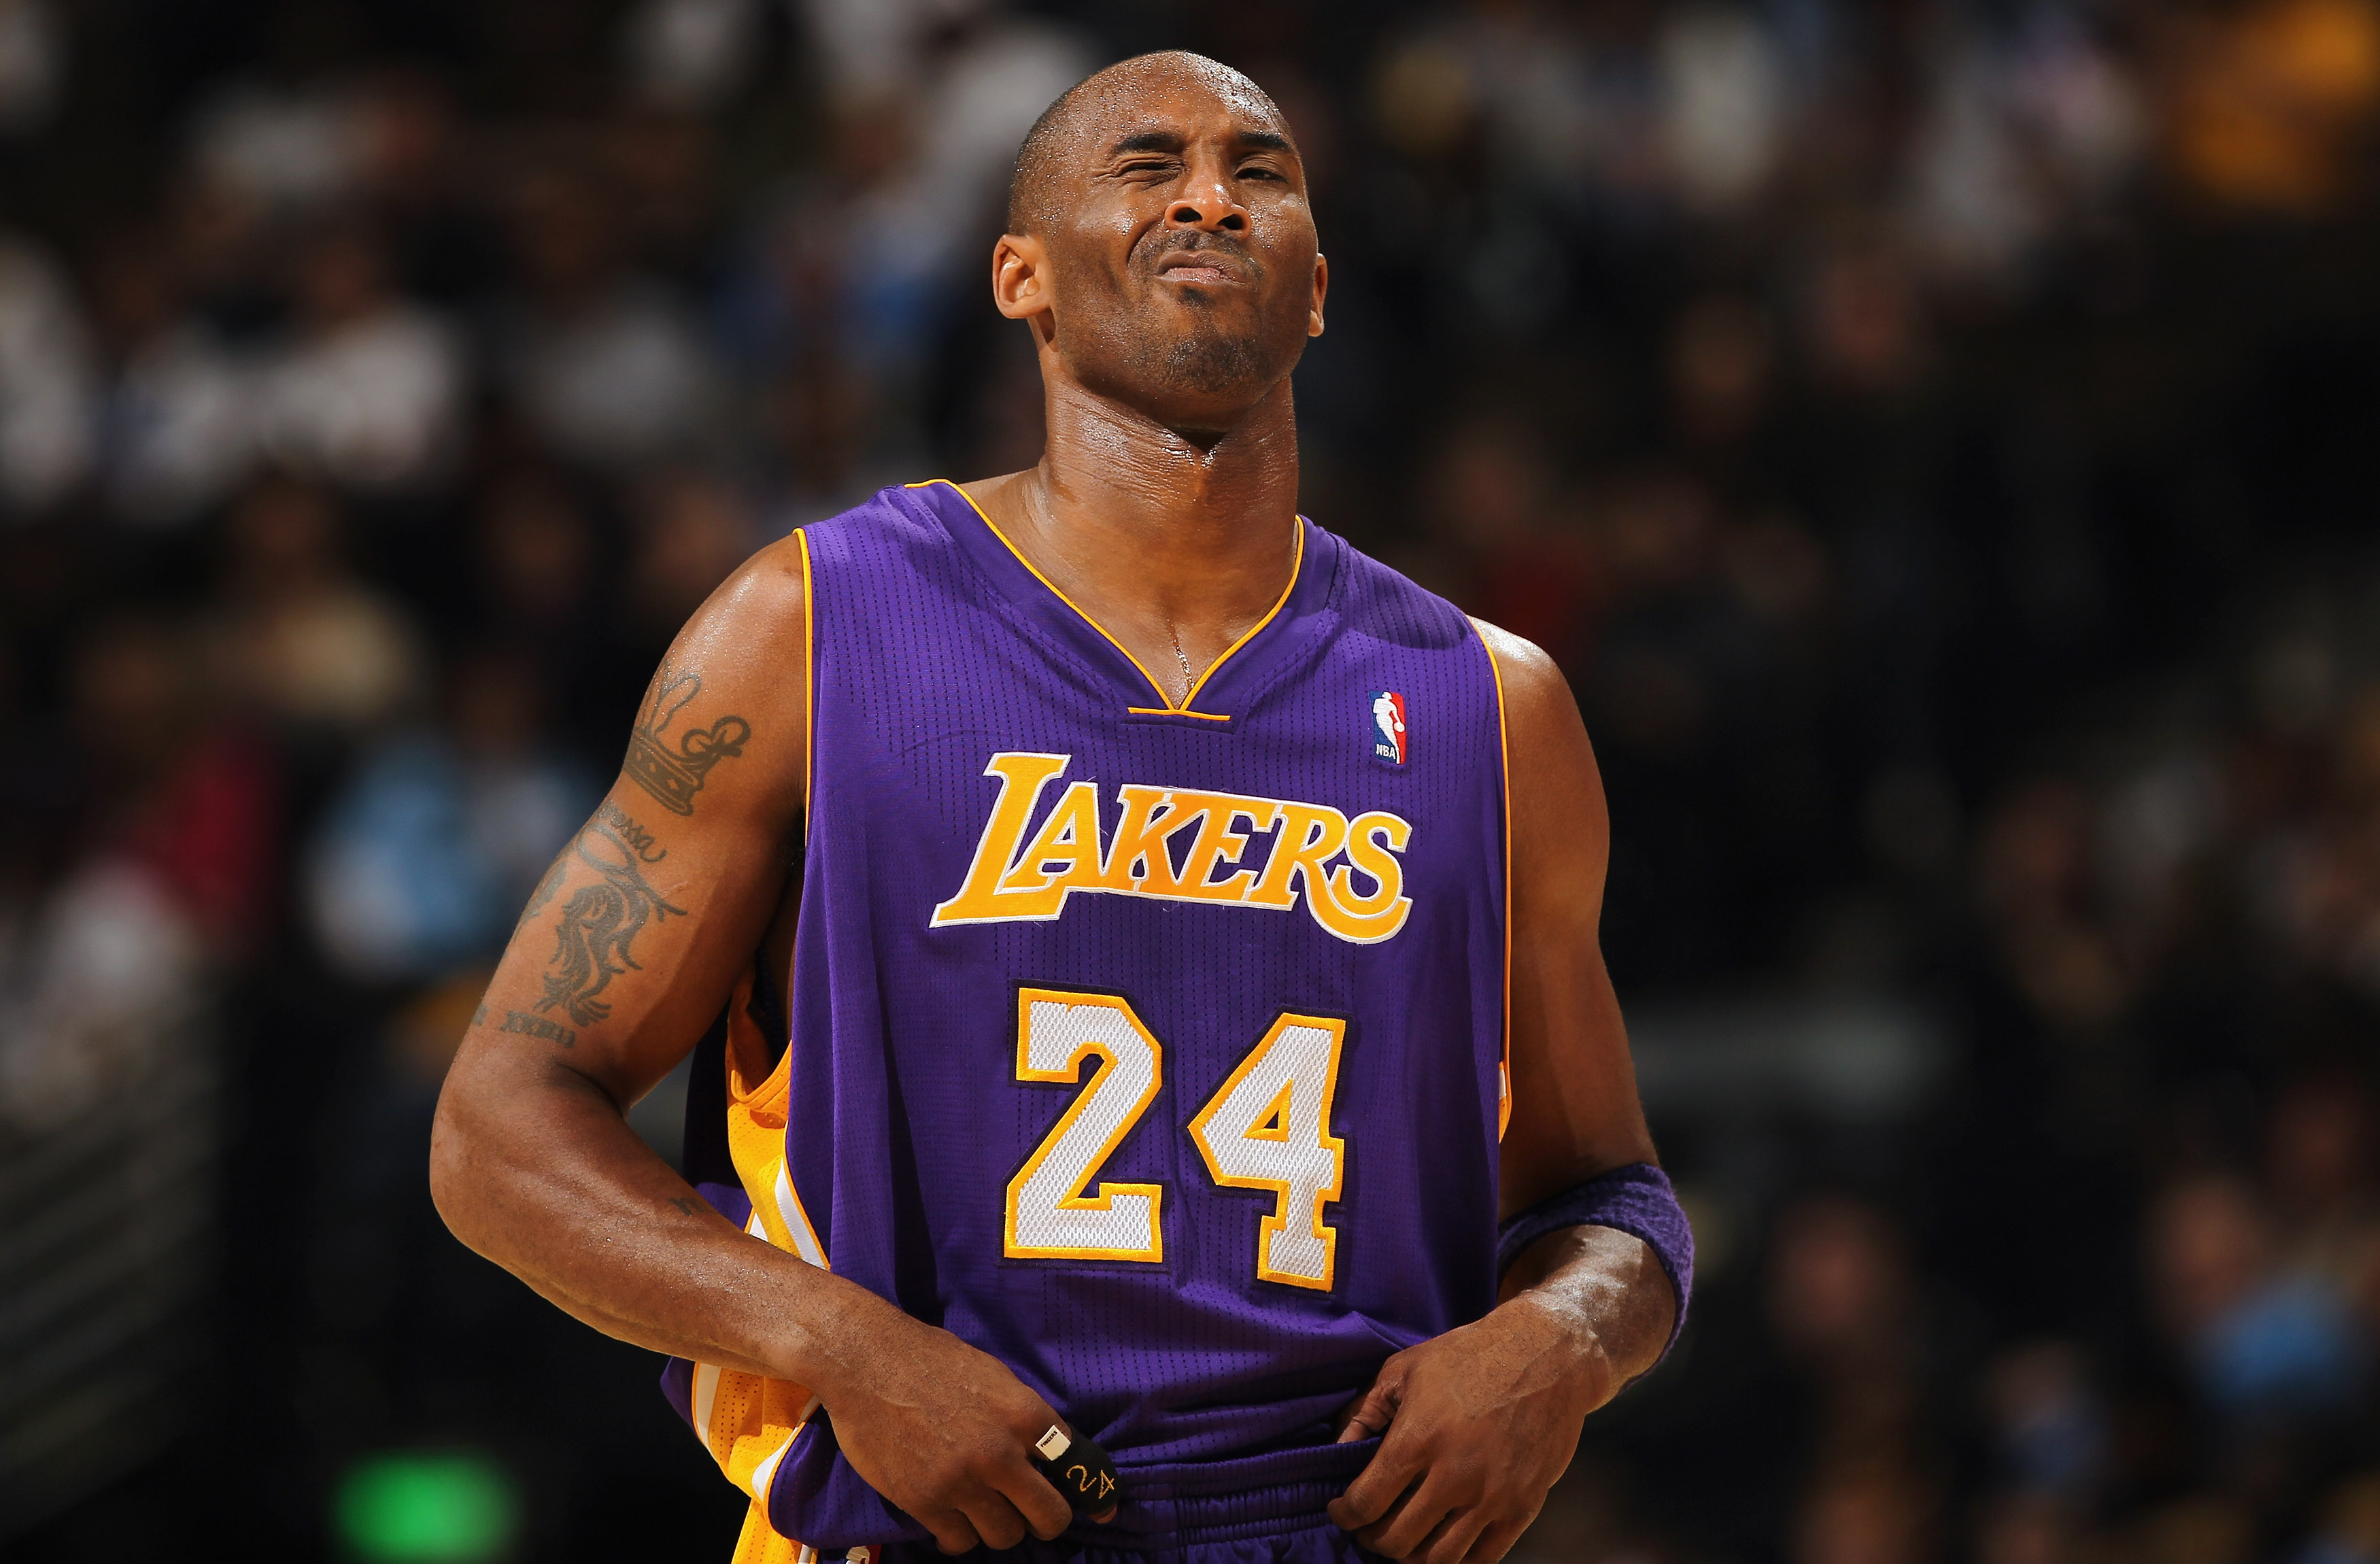 Kobe Bryant smiles and poses with a basketball wearing Laker home color  shoes and jersey at